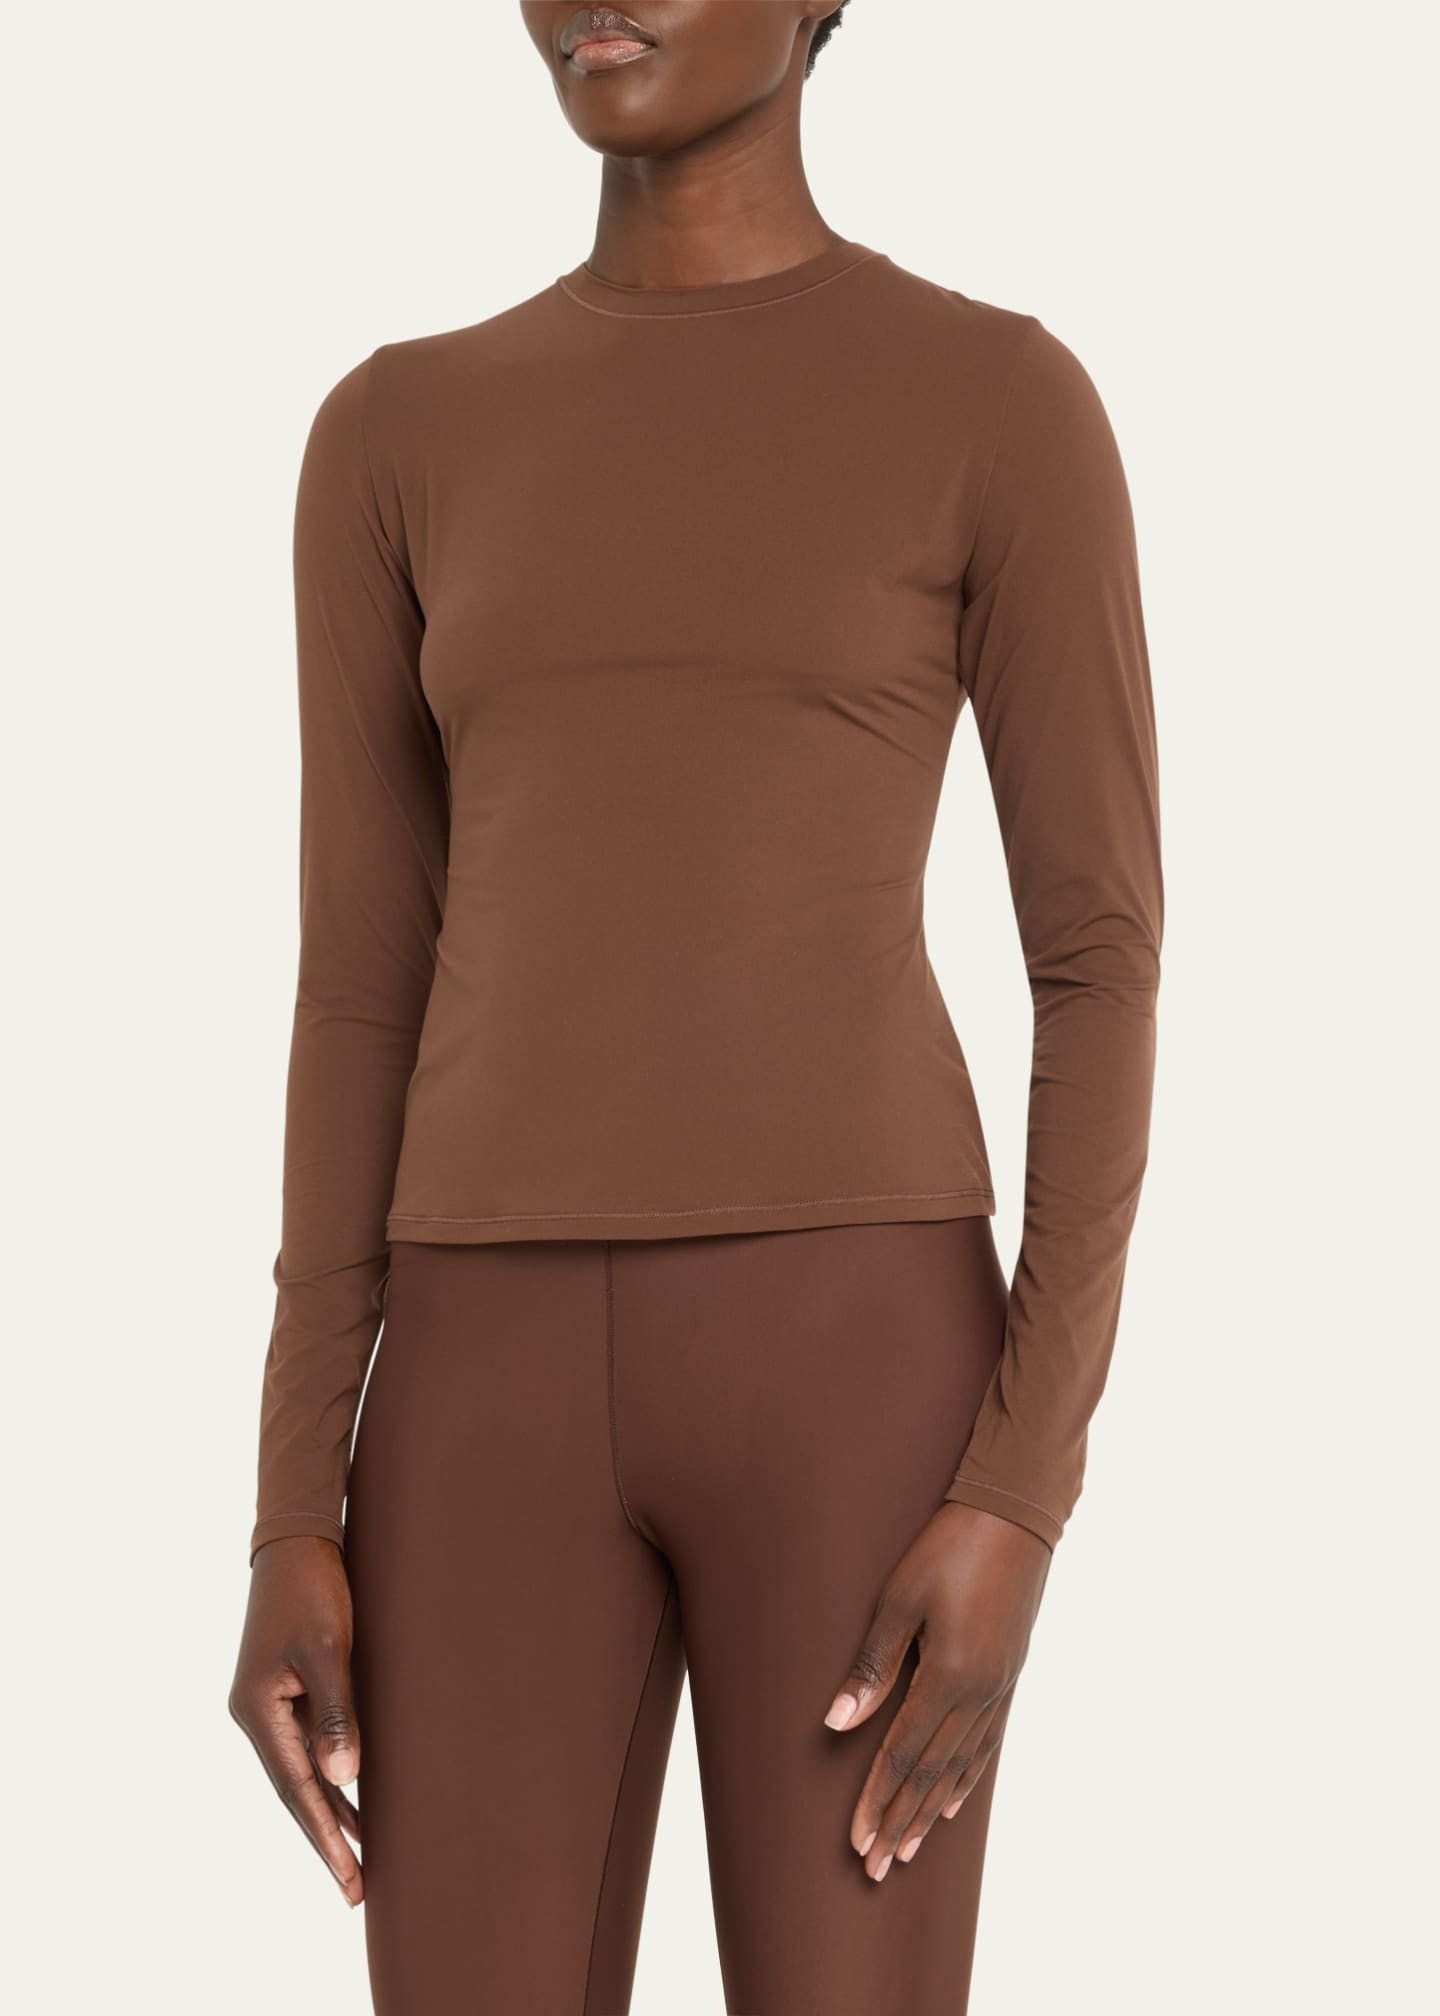 SKIMS - Fits Everybody Long Sleeve Crewneck Dress in Bronze at